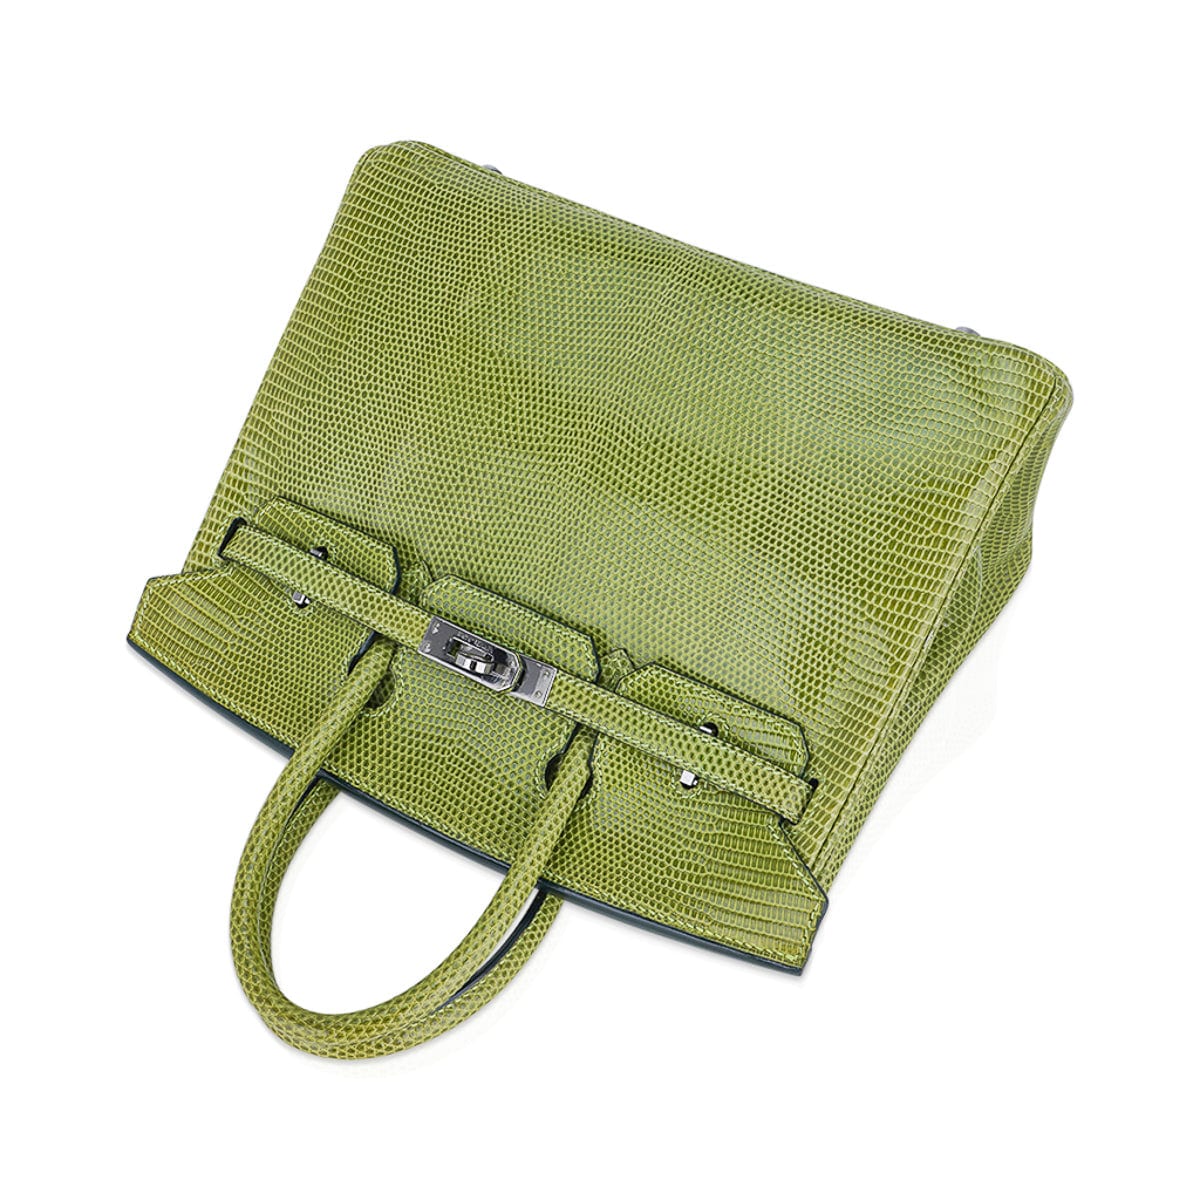 hermes vert anis products for sale